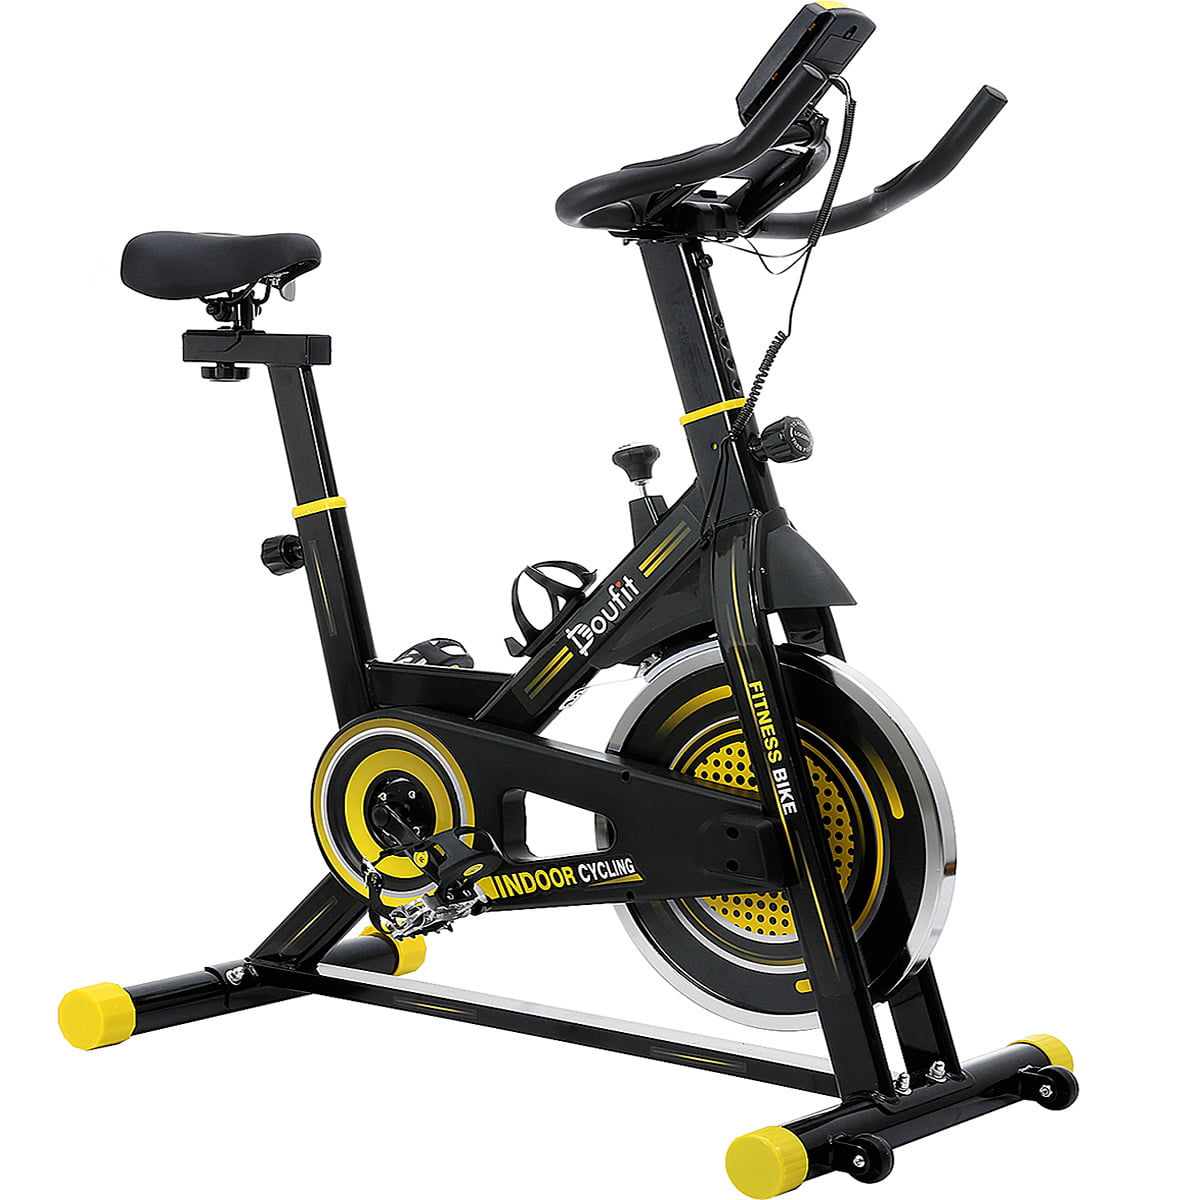 GEEMAX Exercise Bicycle Cycling Fitness Stationary Bike Cardio Home Workout Gym 